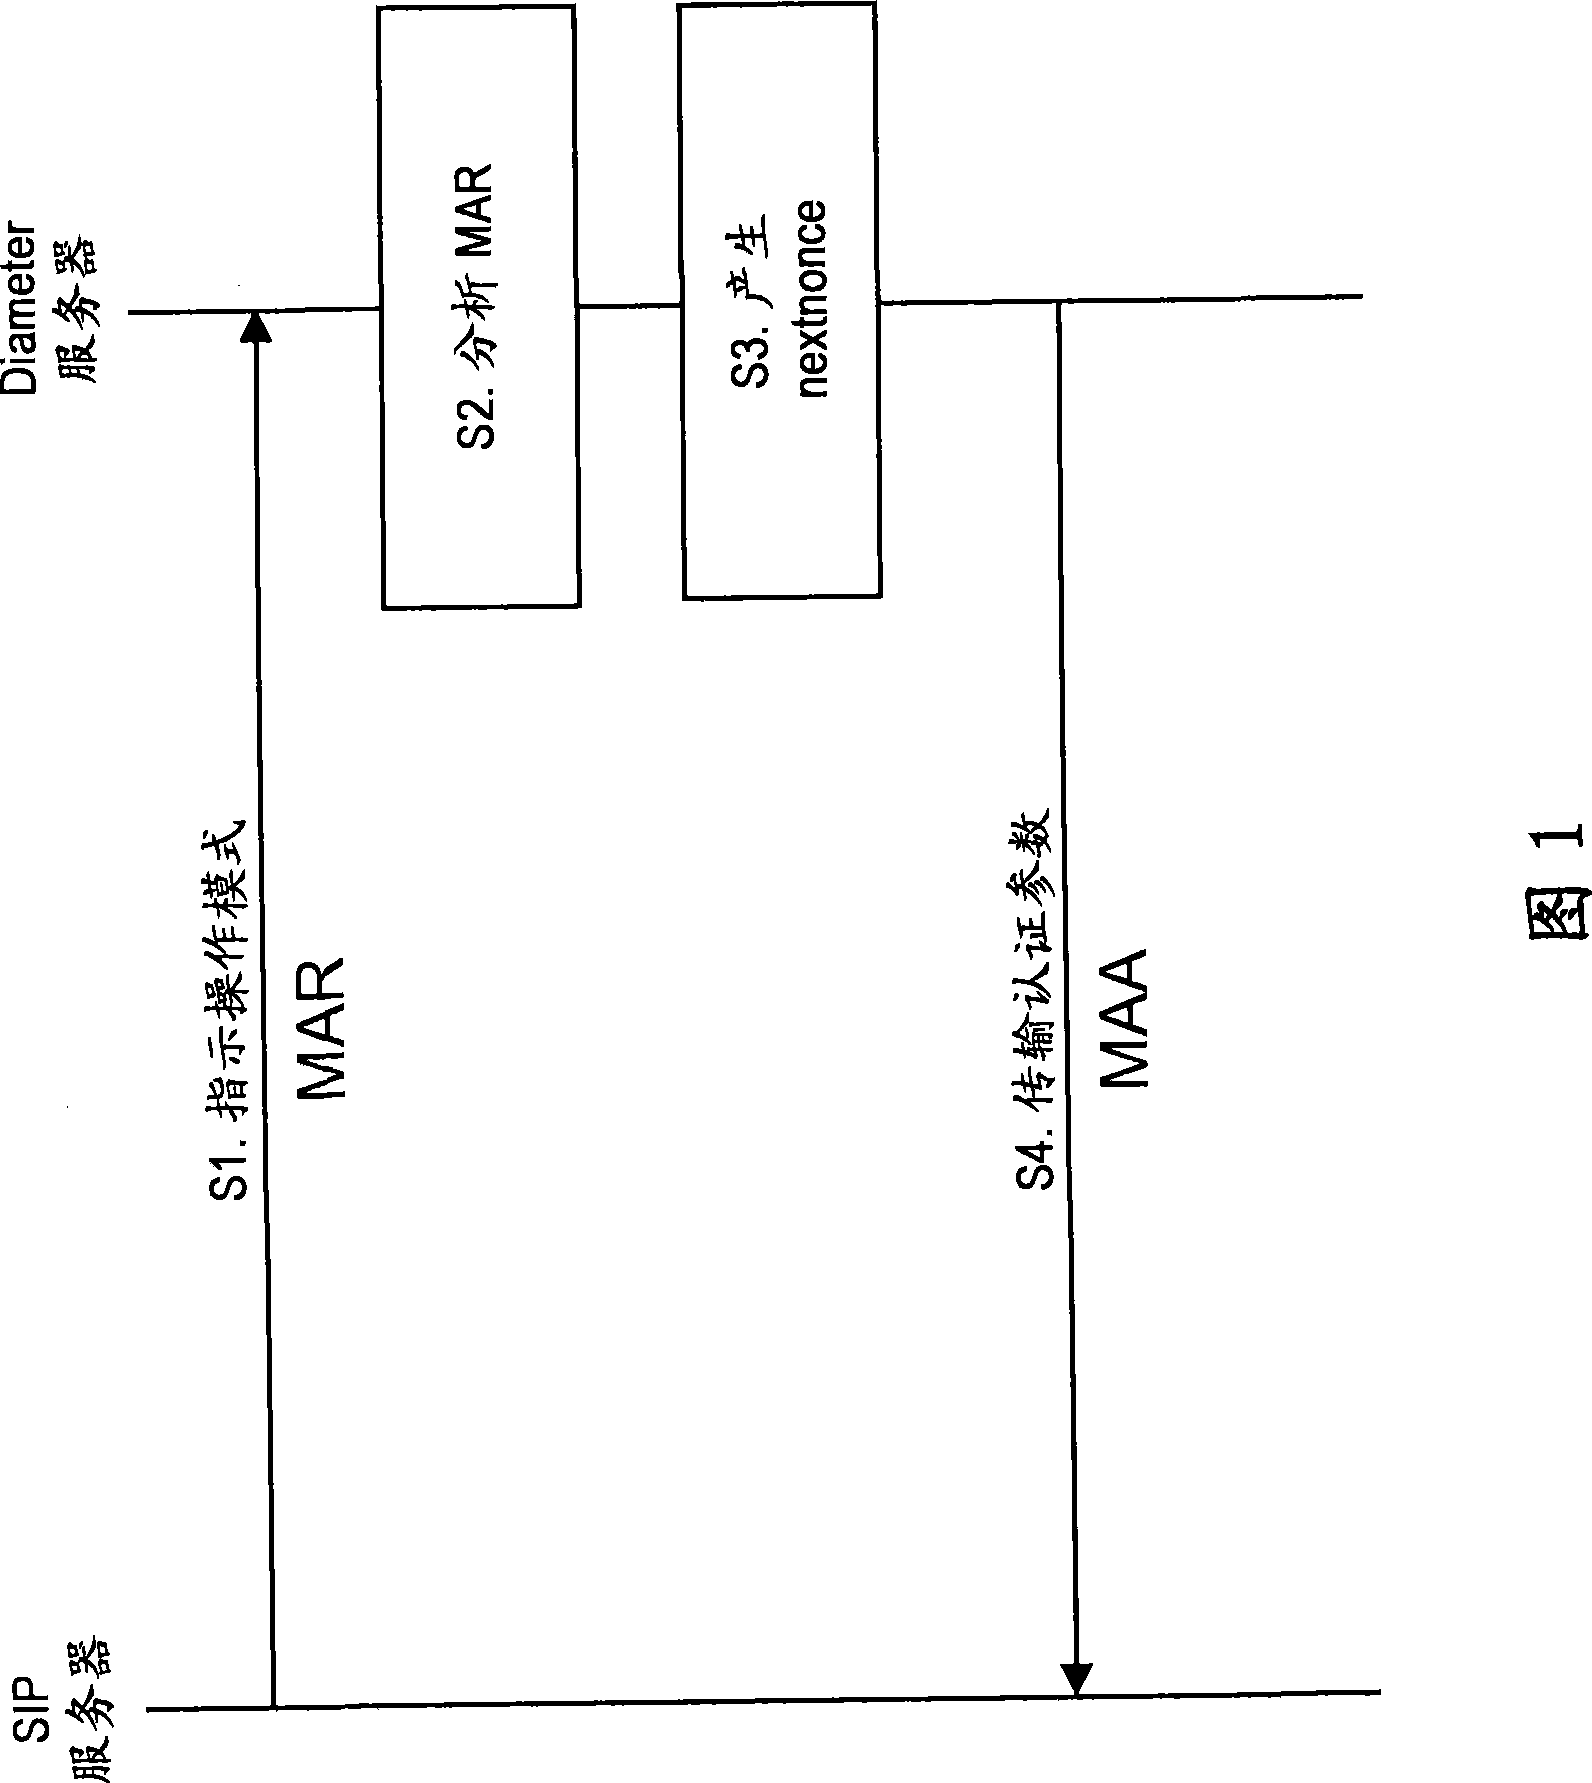 Method, apparatuses and computer media for nonce-based authentication scheme comprising indication of session control server's operation mode in authentication request